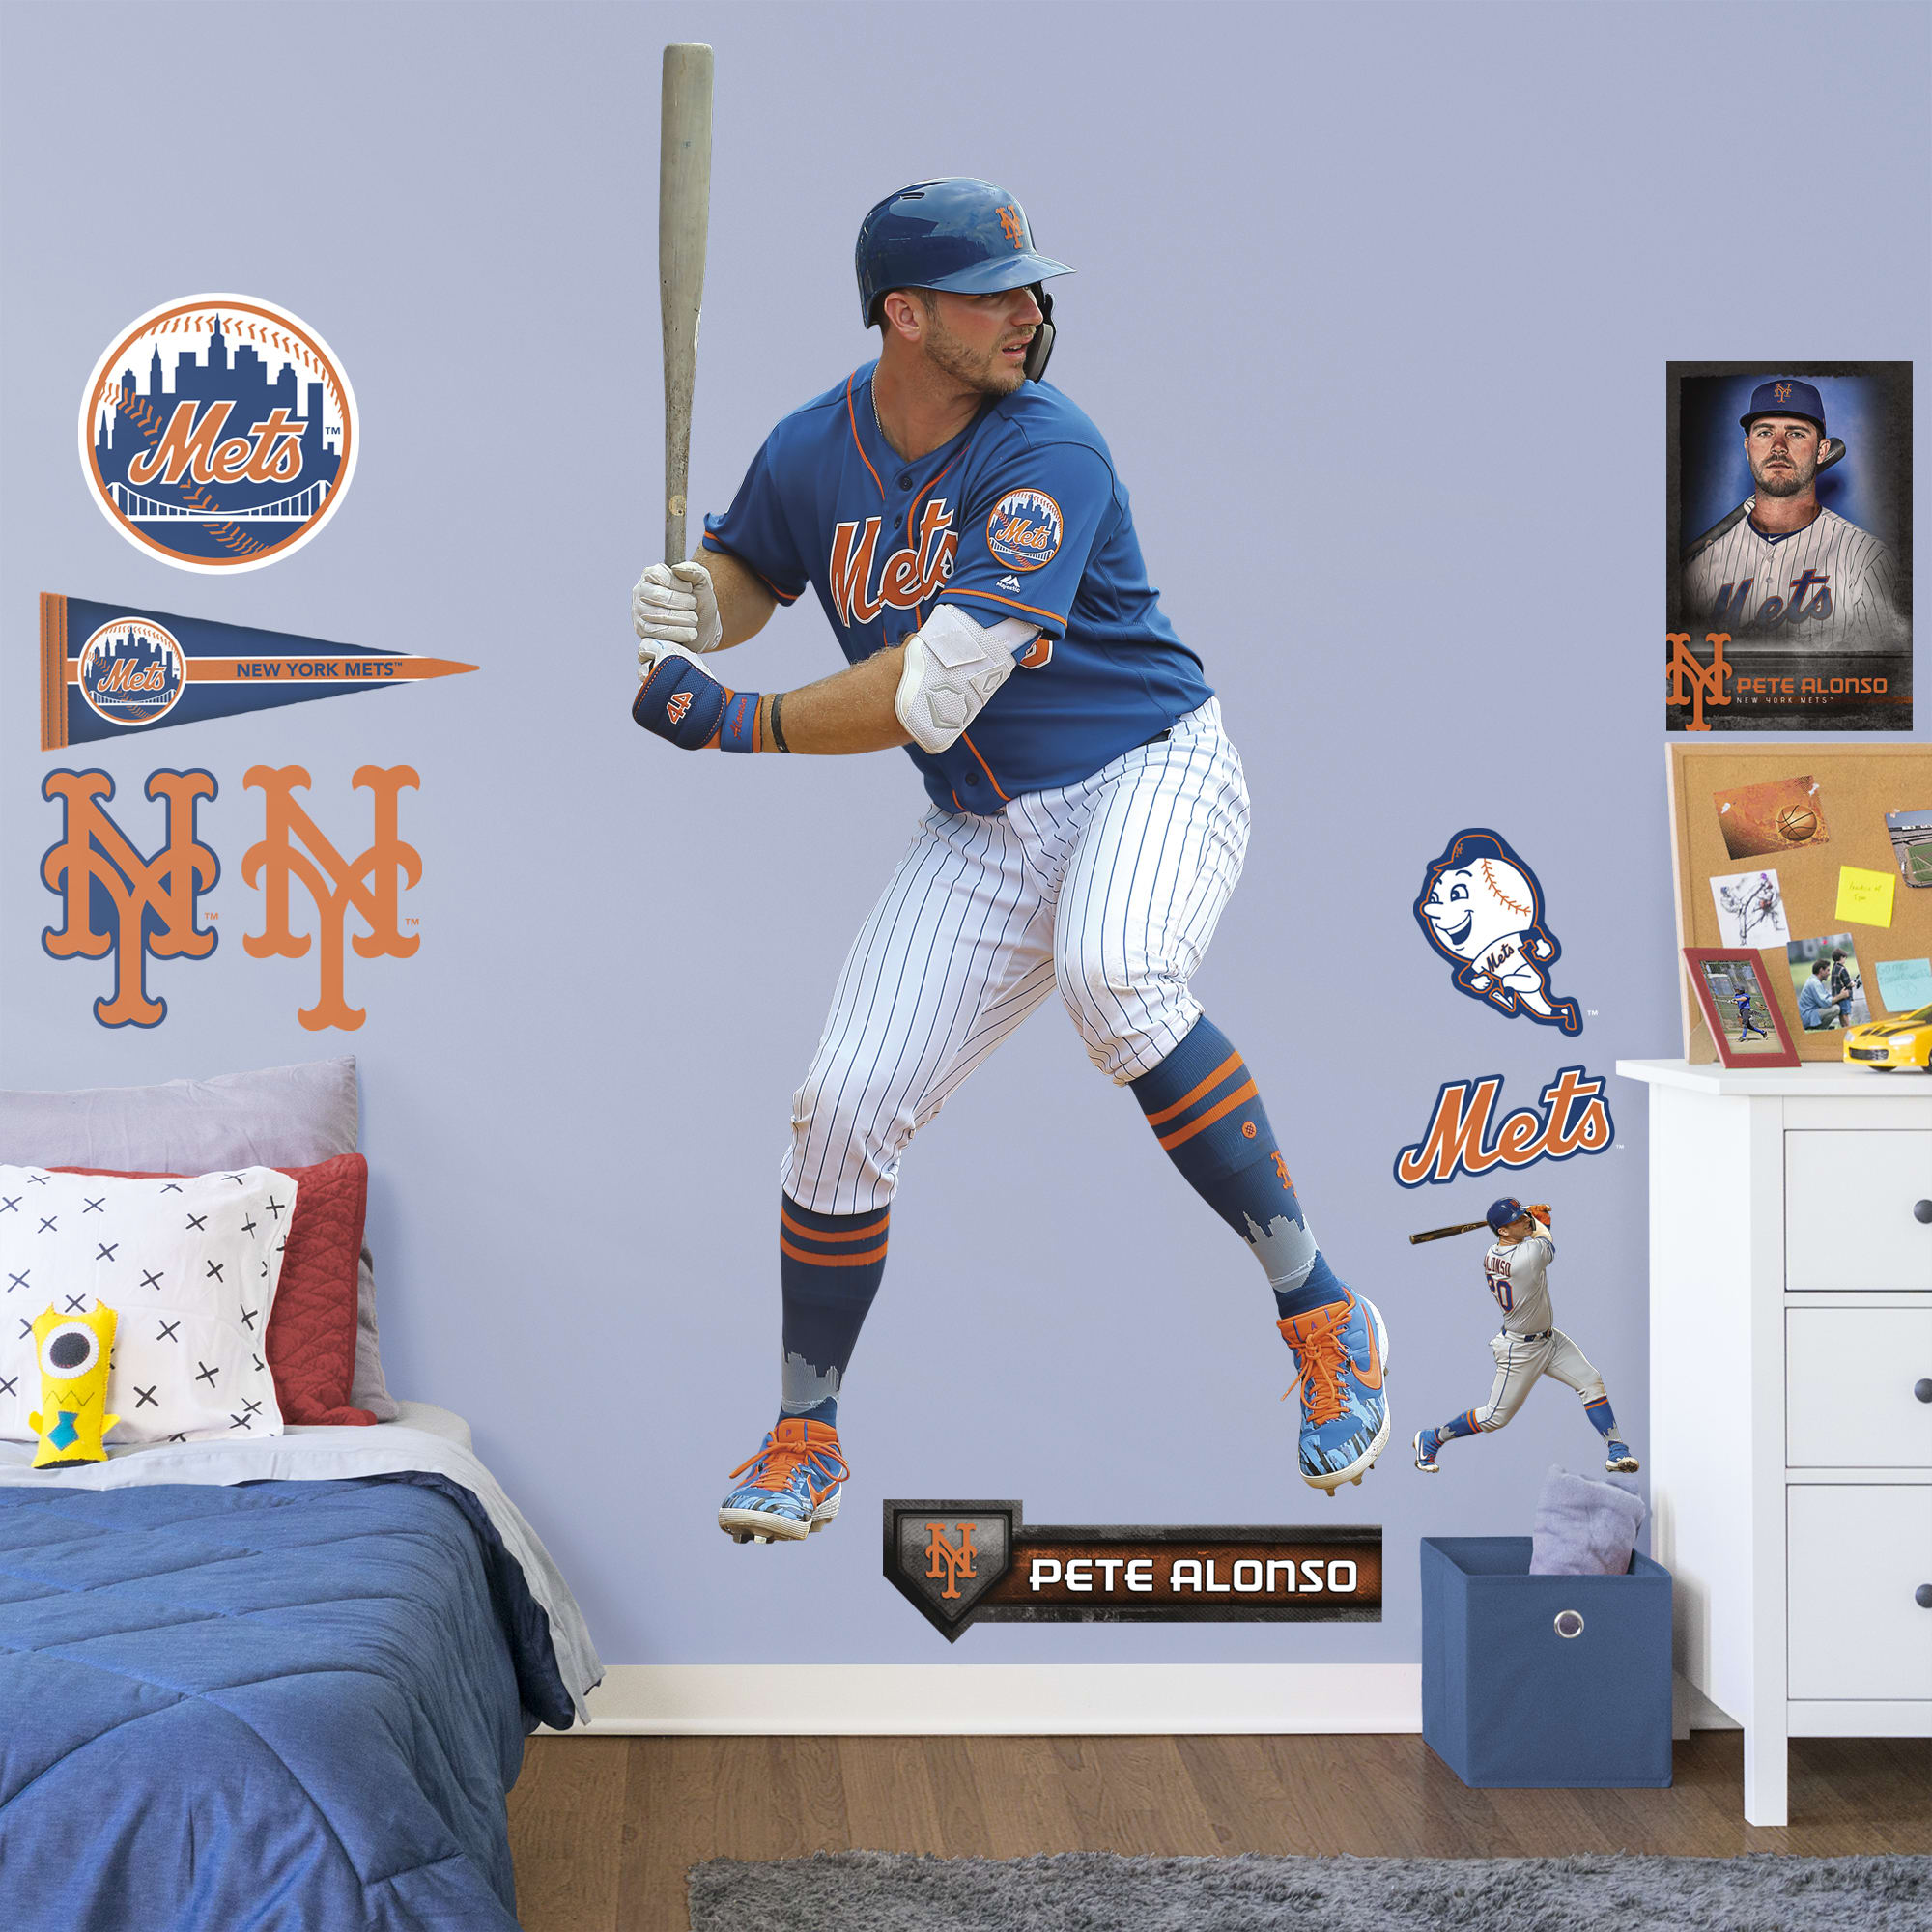 Pete Alonso for New York Mets - Officially Licensed MLB Removable Wall Decal Life-Size Athlete + 11 Decals (43"W x 85"H) by Fath